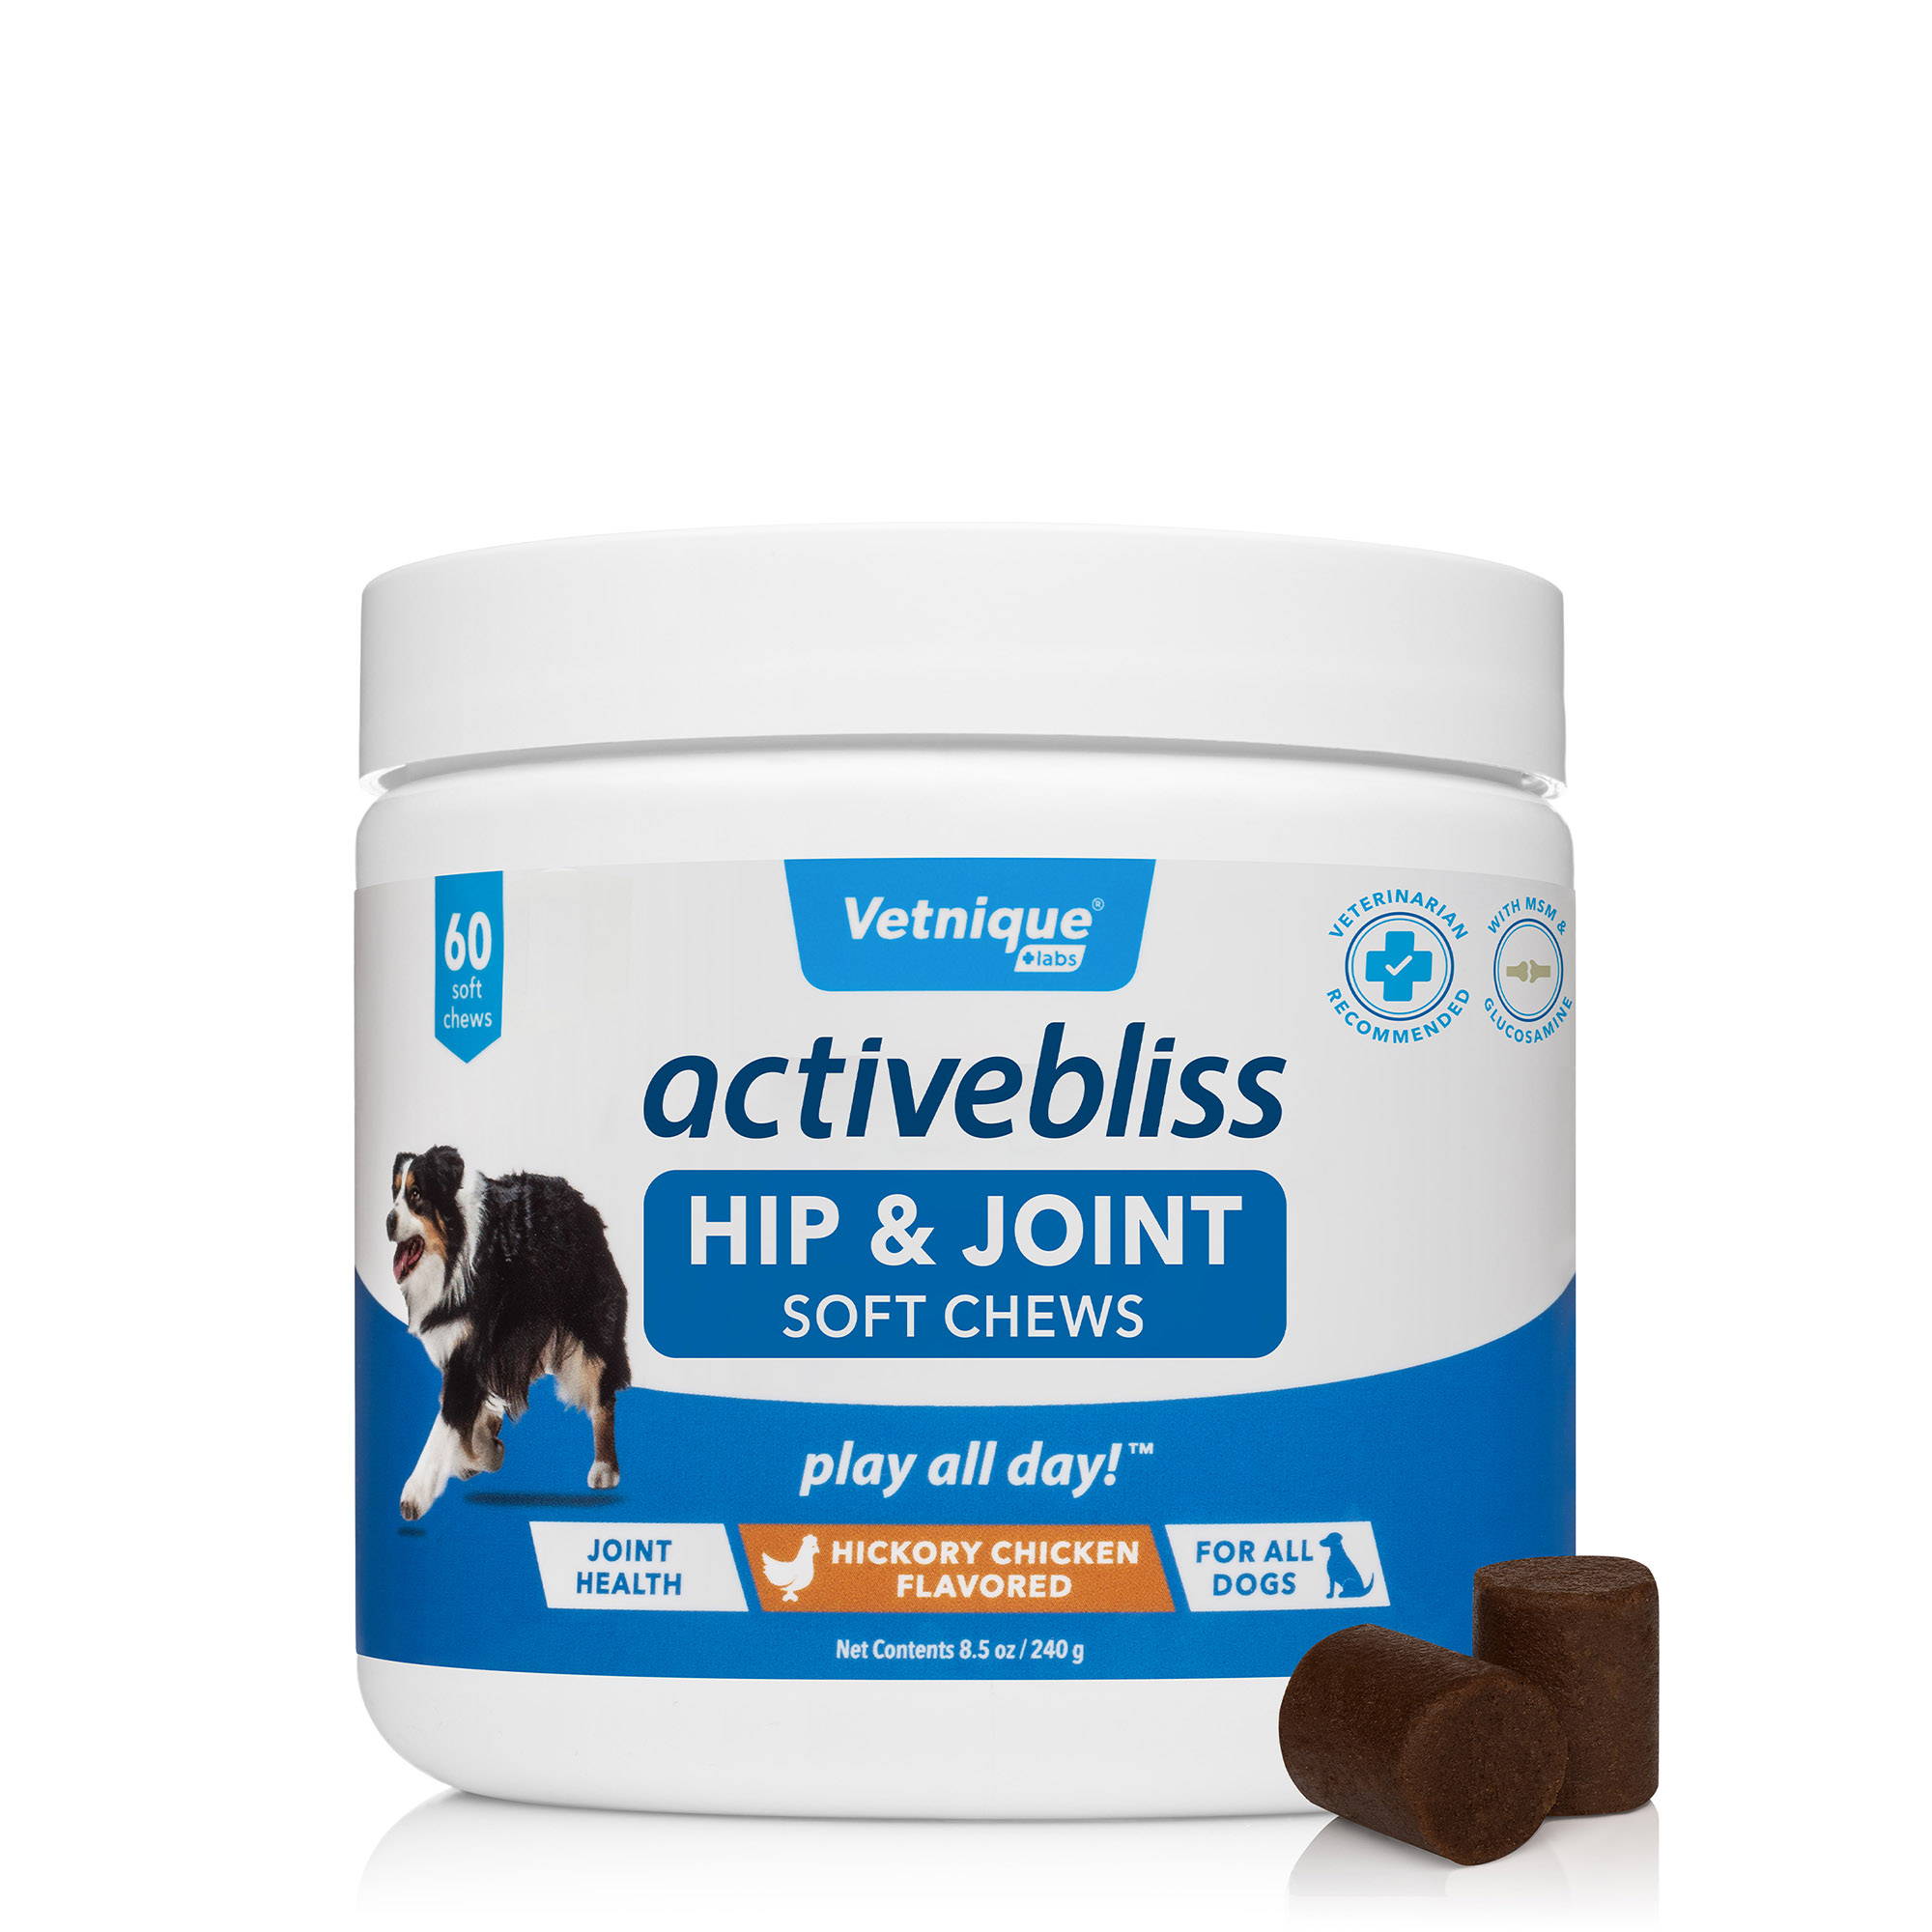 Activebliss Hip & Joint Supplements for Dogs